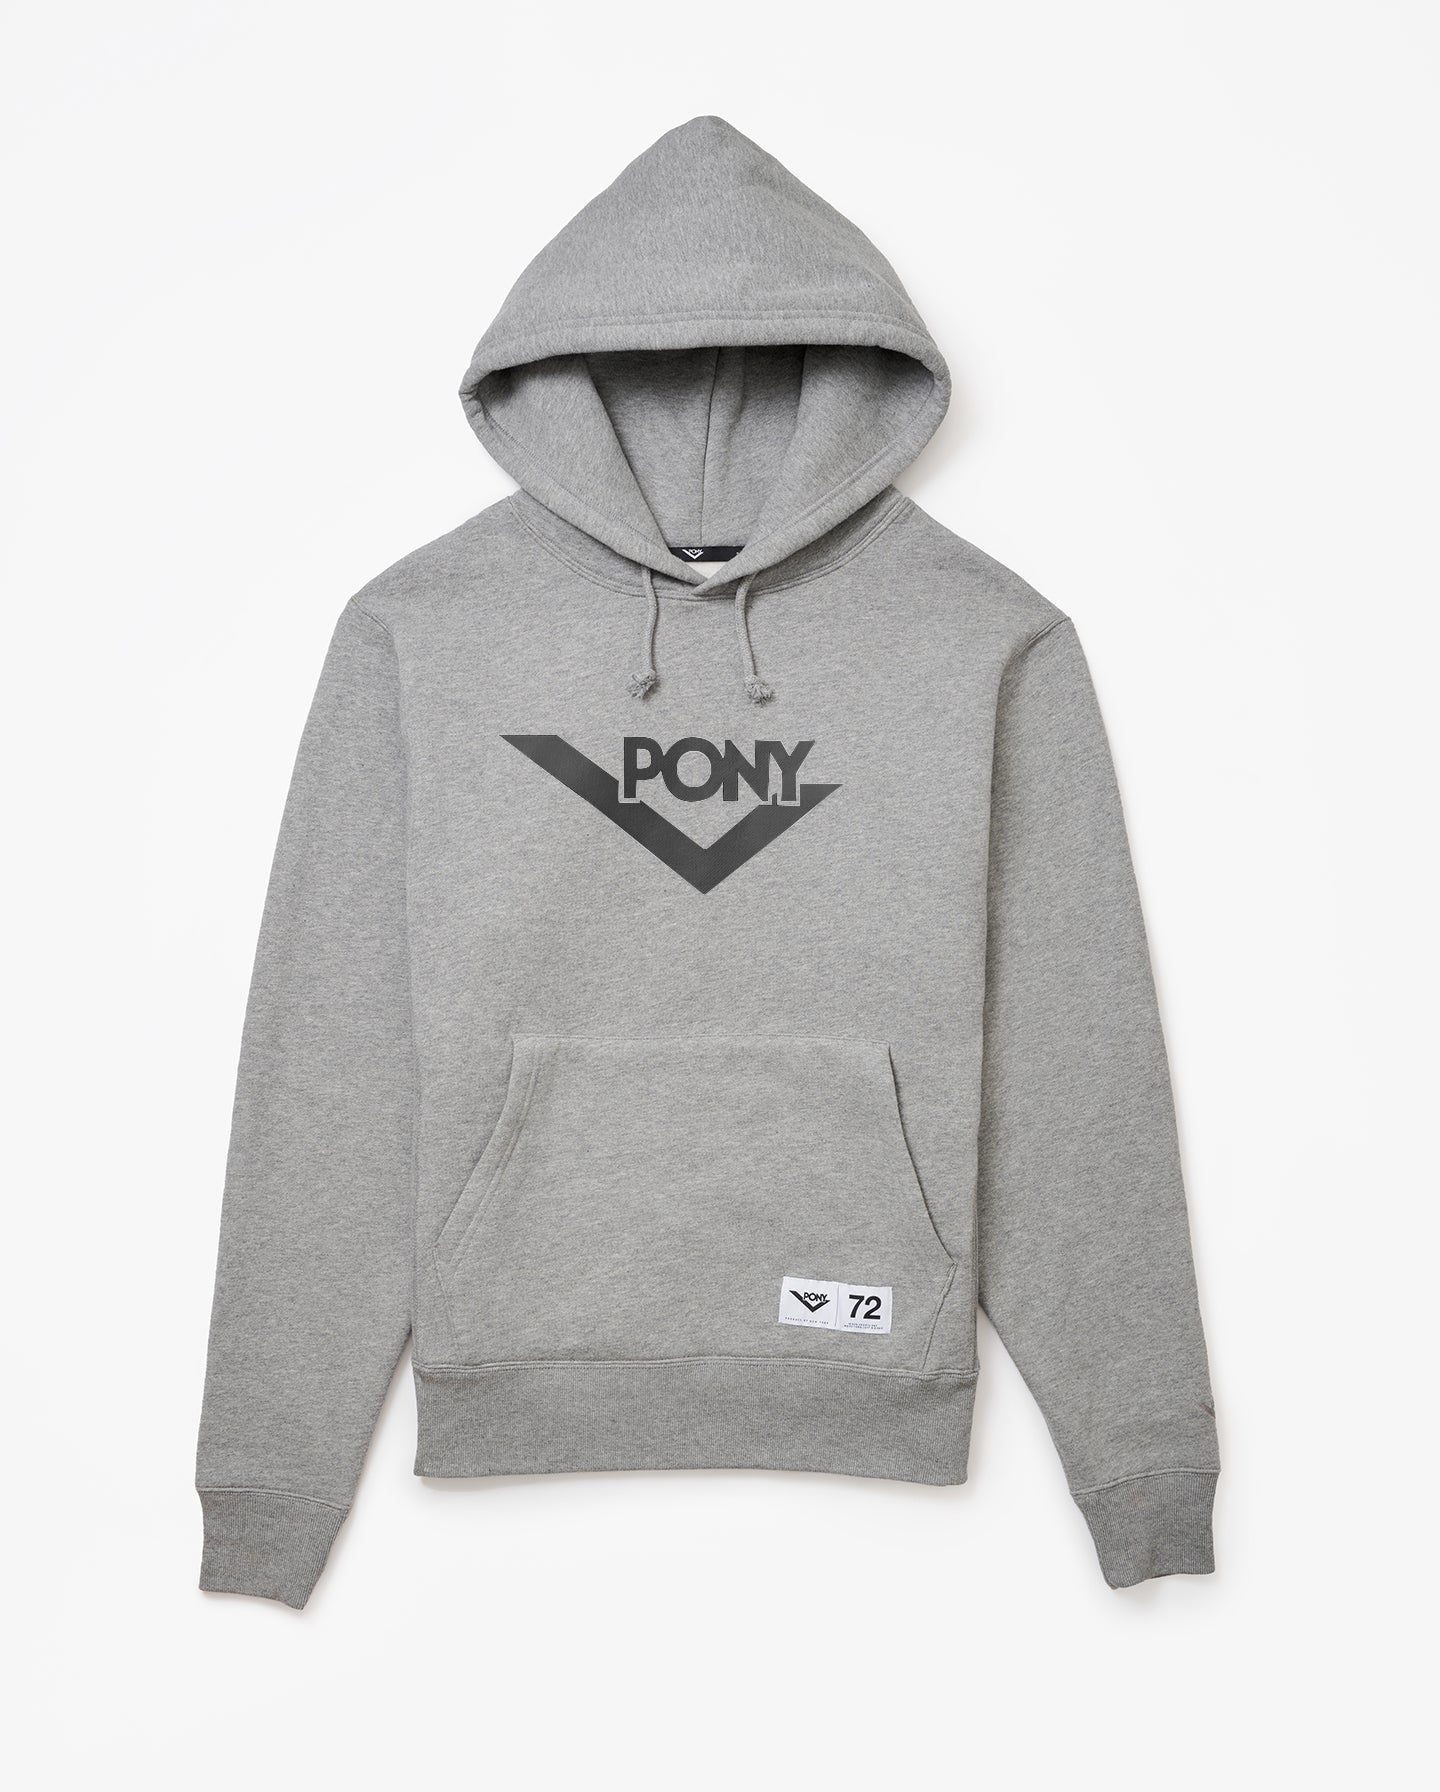 A heathered gray PONY hoodie with Gray Lock-up Logo vinyl printed on the front above the kangaroo pocket. Locker label sewn at bottom right.